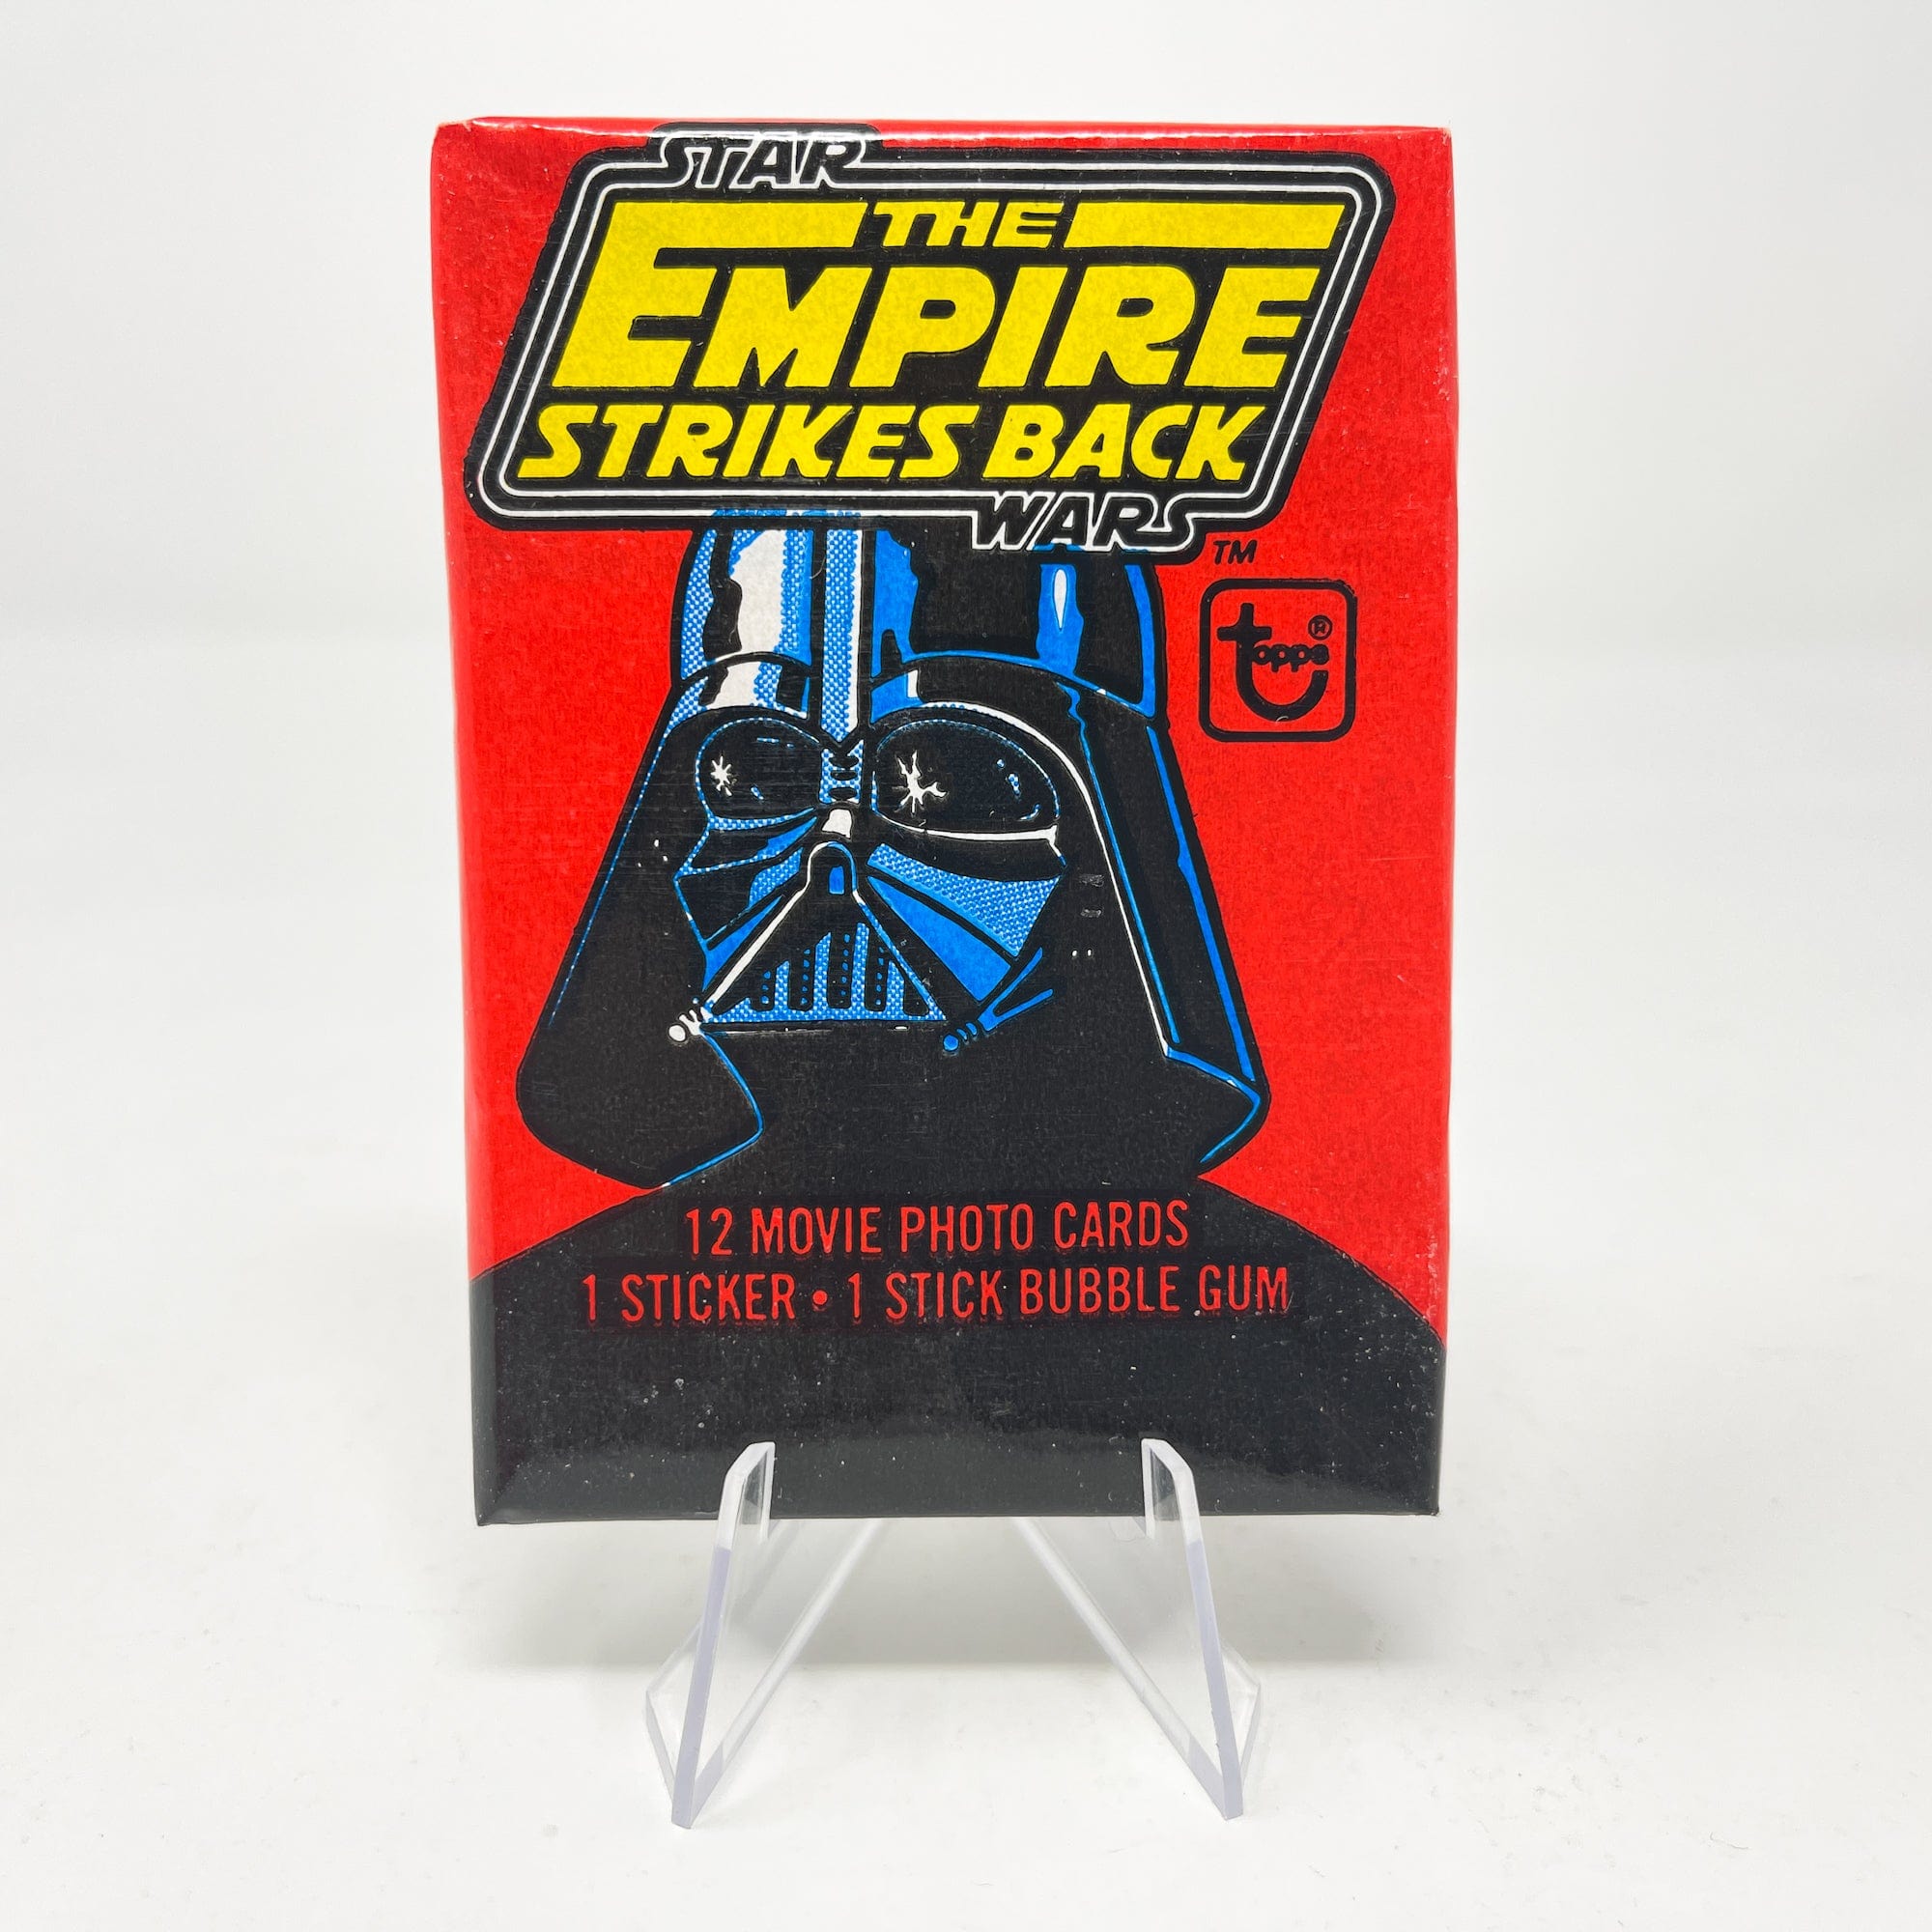 1970s Dixie Cups Jr. Star Wars/empire Strikes Back Wax Cups 